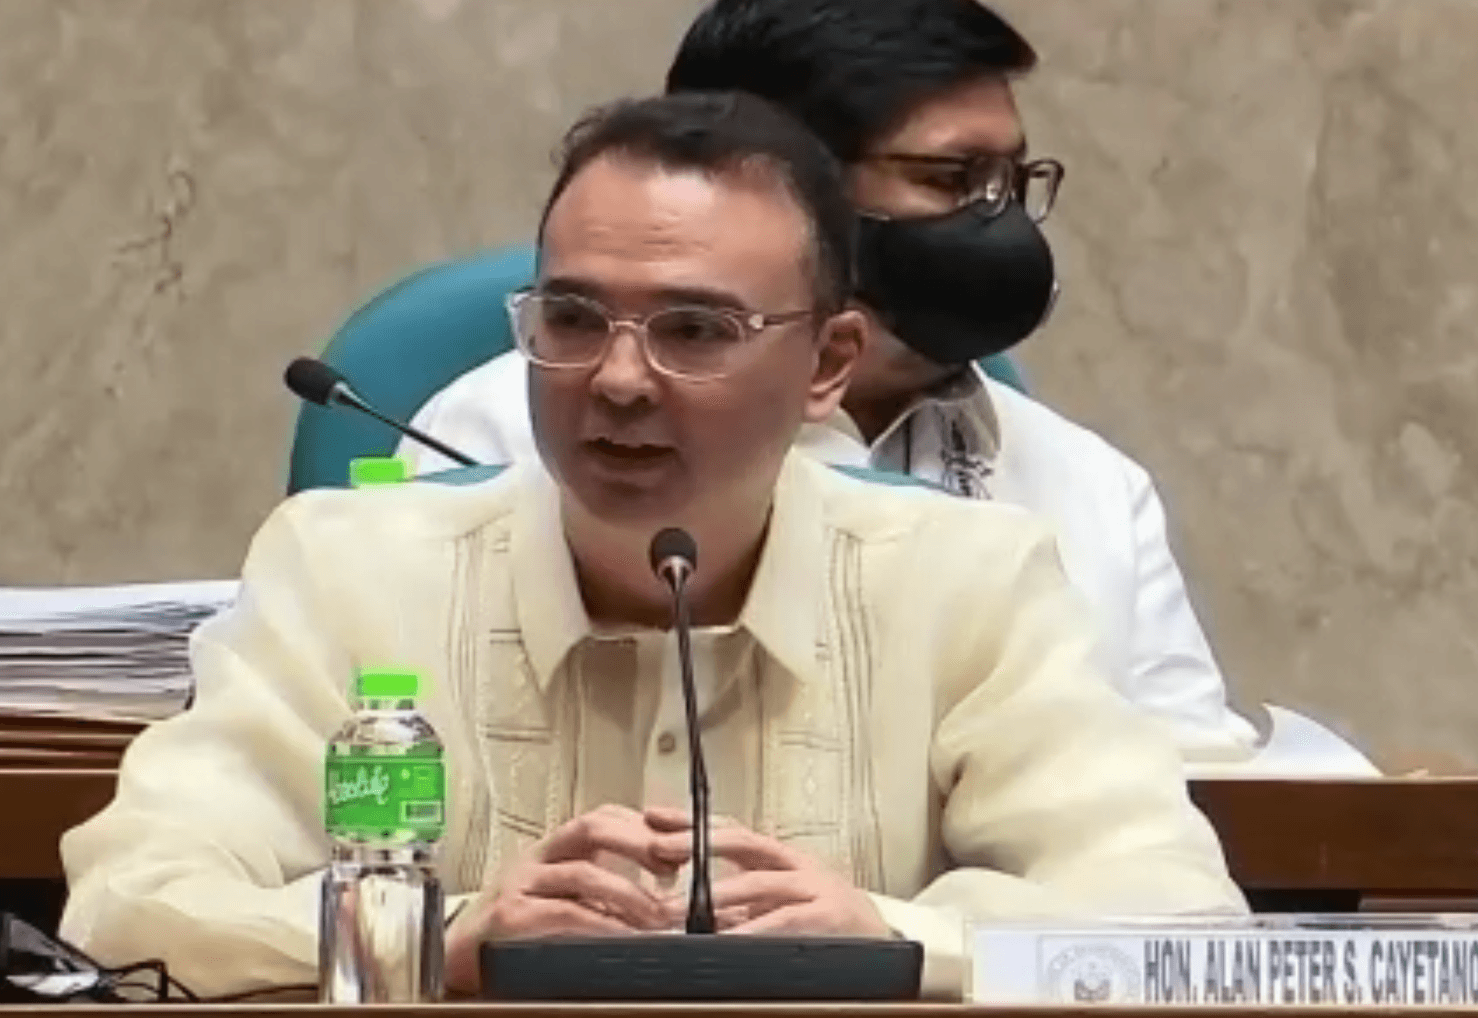 Unlike ABS-CBN, other newsrooms ‘not playing kingmaker’ – Cayetano